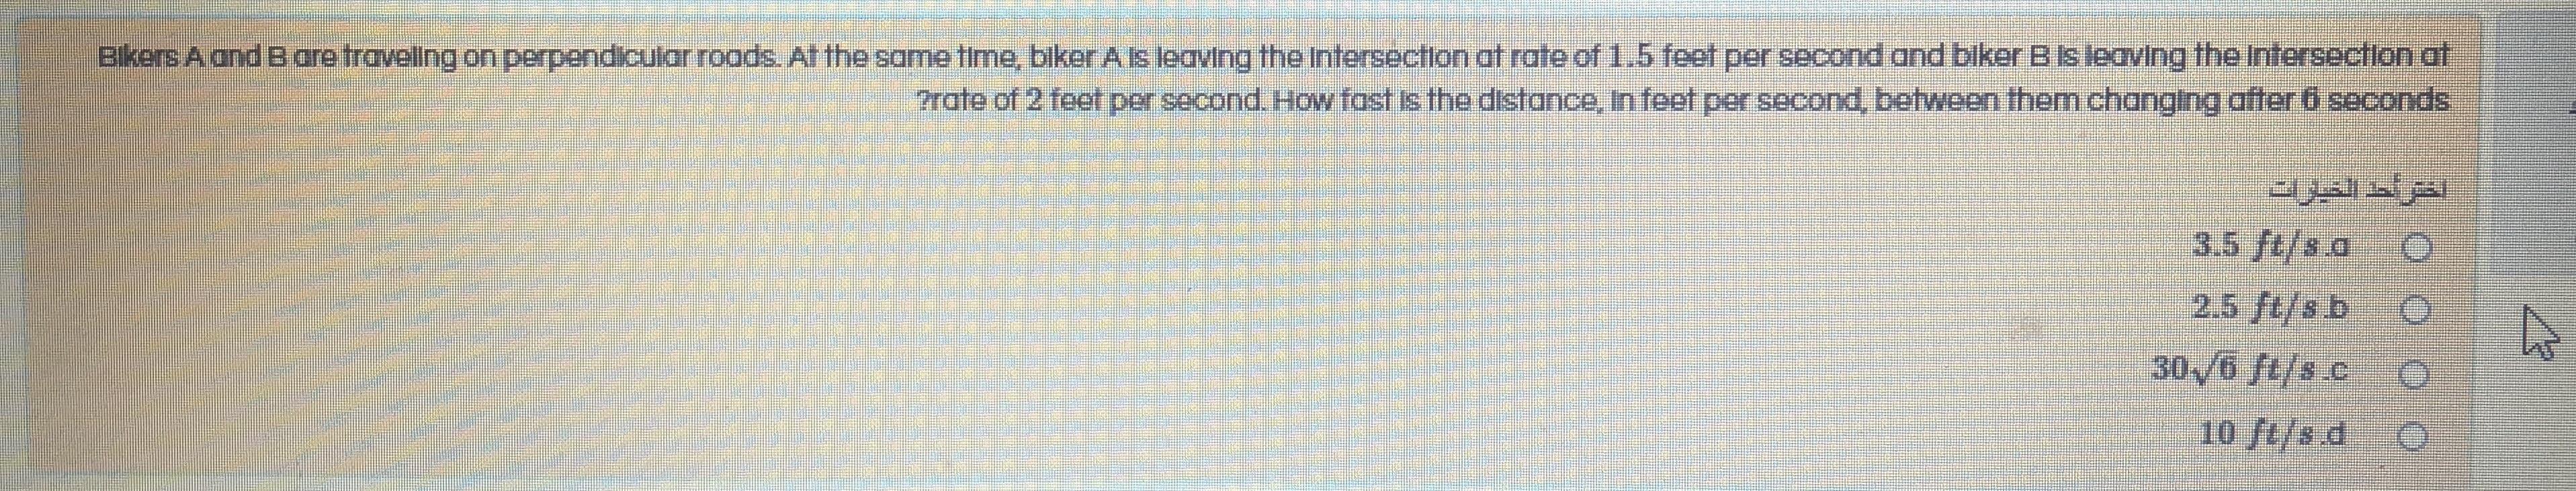 Blkers A and Bare travellng on perpendicular roads. At the same time, biker A Is leaving the Intersectlon at rate of 1.5 feet per second and biker B Is leaving the Intersectlon at
rate of 2 feet per second. How fost Is the dstance, In feet per second, between them changIng after 6 seconds
